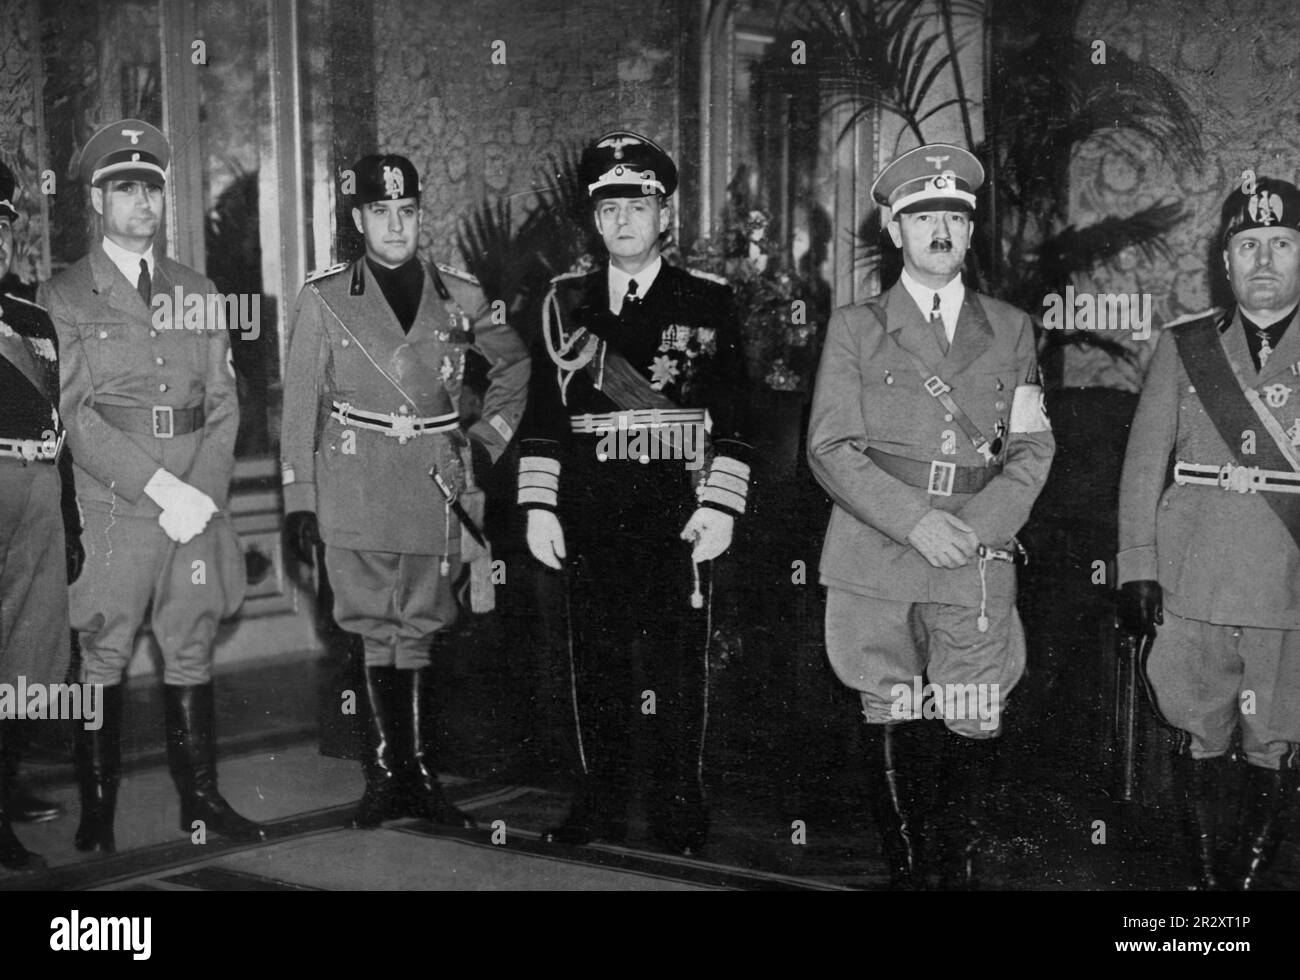 1938, Benito Mussolini and Galeazzo Ciano meet Hitler and his staff, including Rudolf Hess in Rome Stock Photo